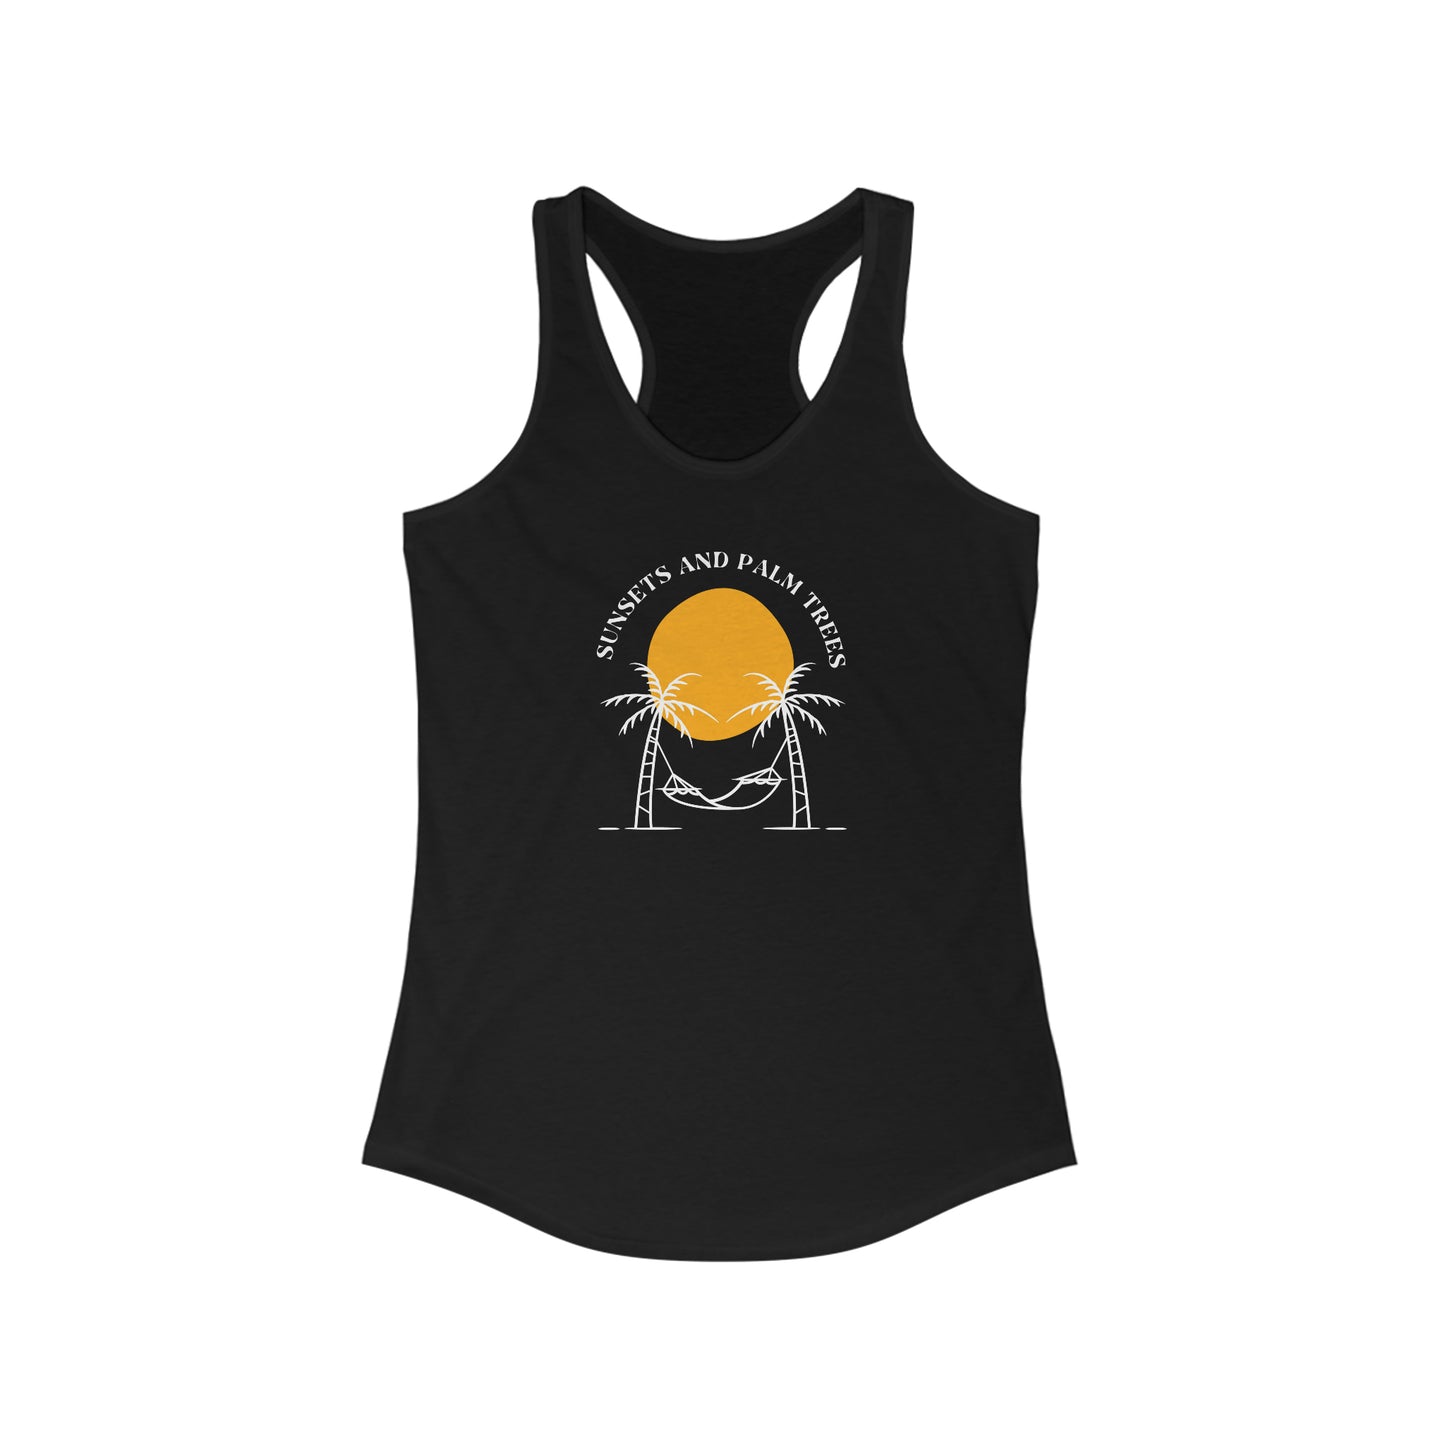 Sunsets and Palm Trees Women's Ideal Racerback Tank